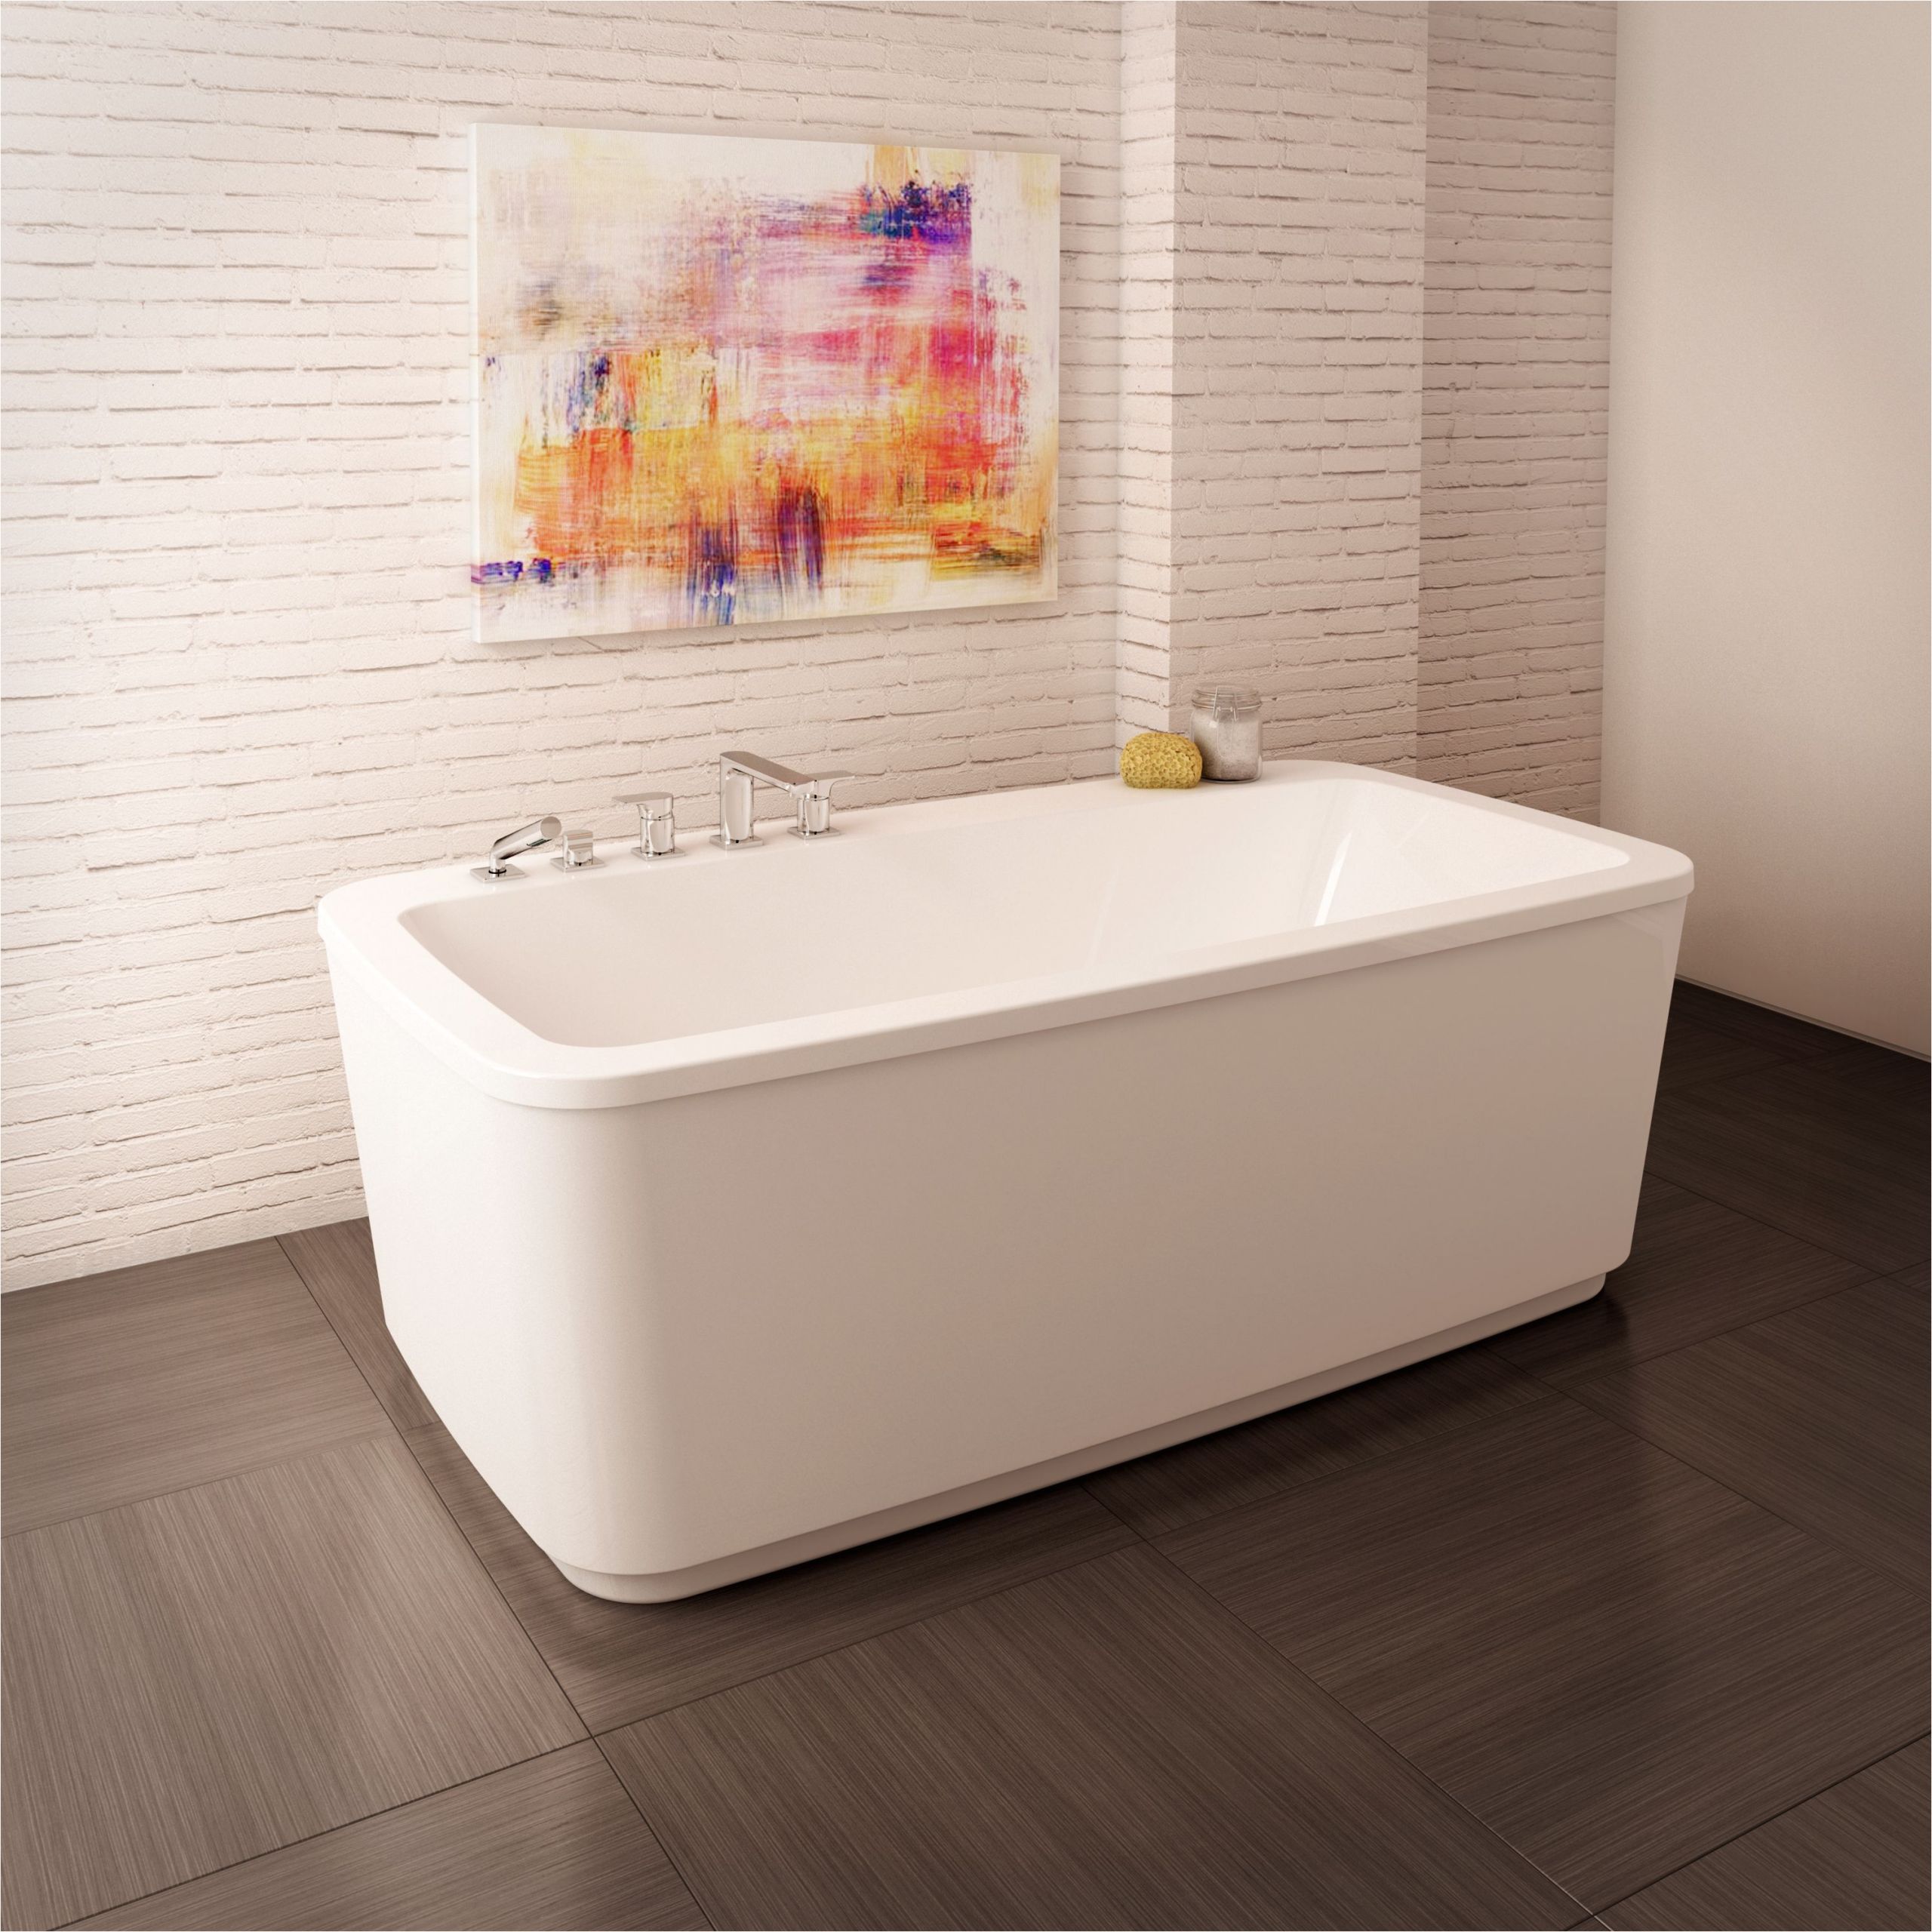 freestanding tub with deck mount faucet